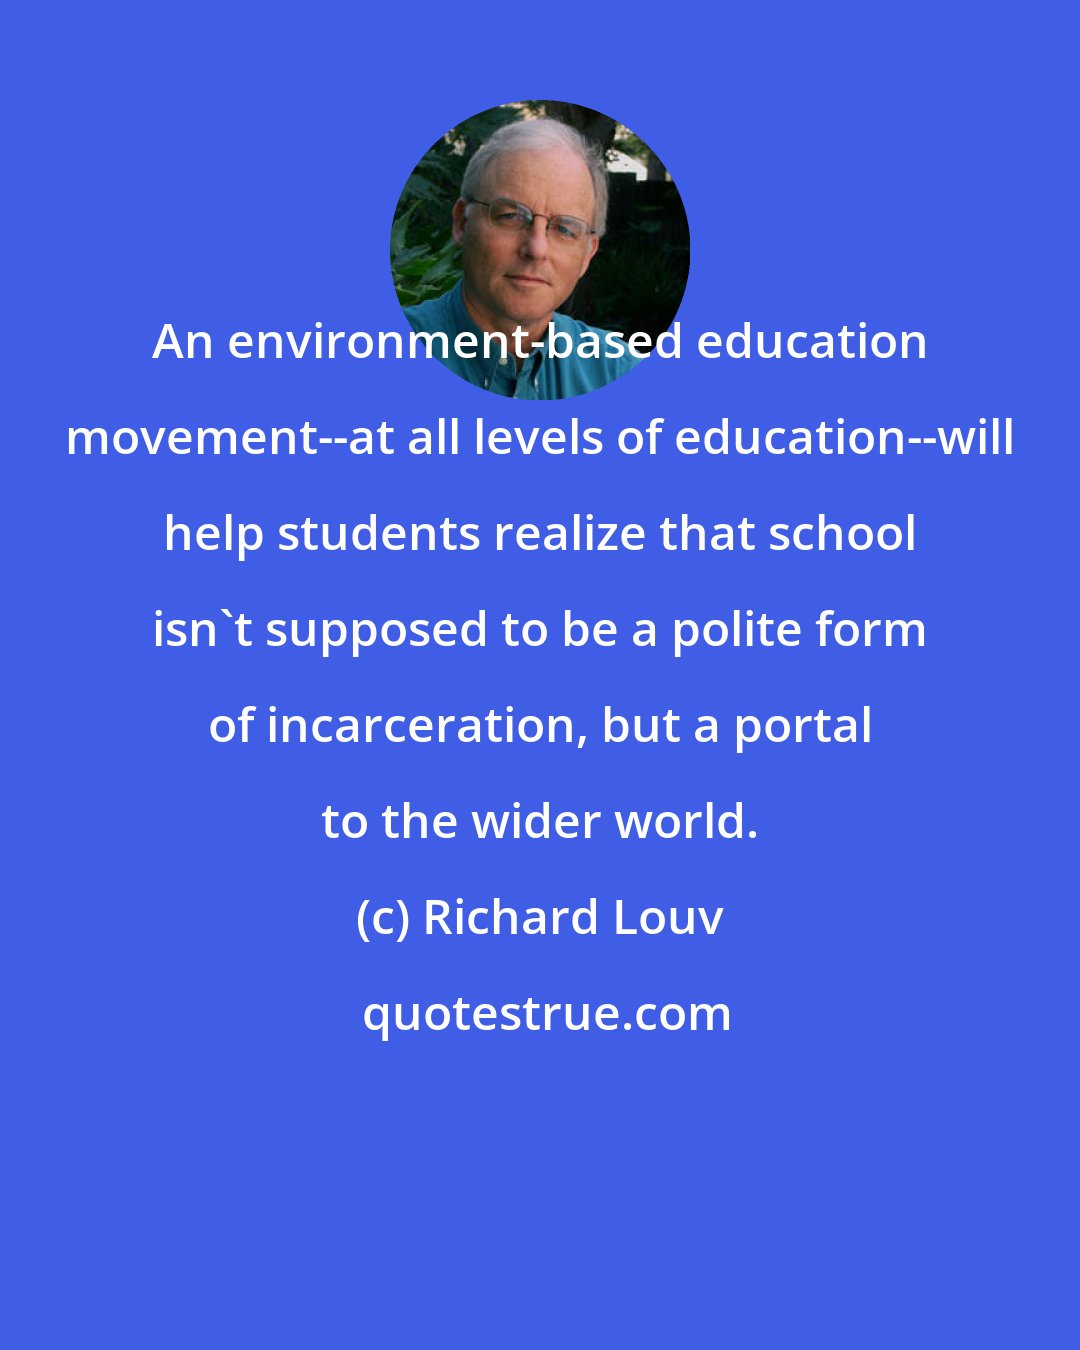 Richard Louv: An environment-based education movement--at all levels of education--will help students realize that school isn't supposed to be a polite form of incarceration, but a portal to the wider world.